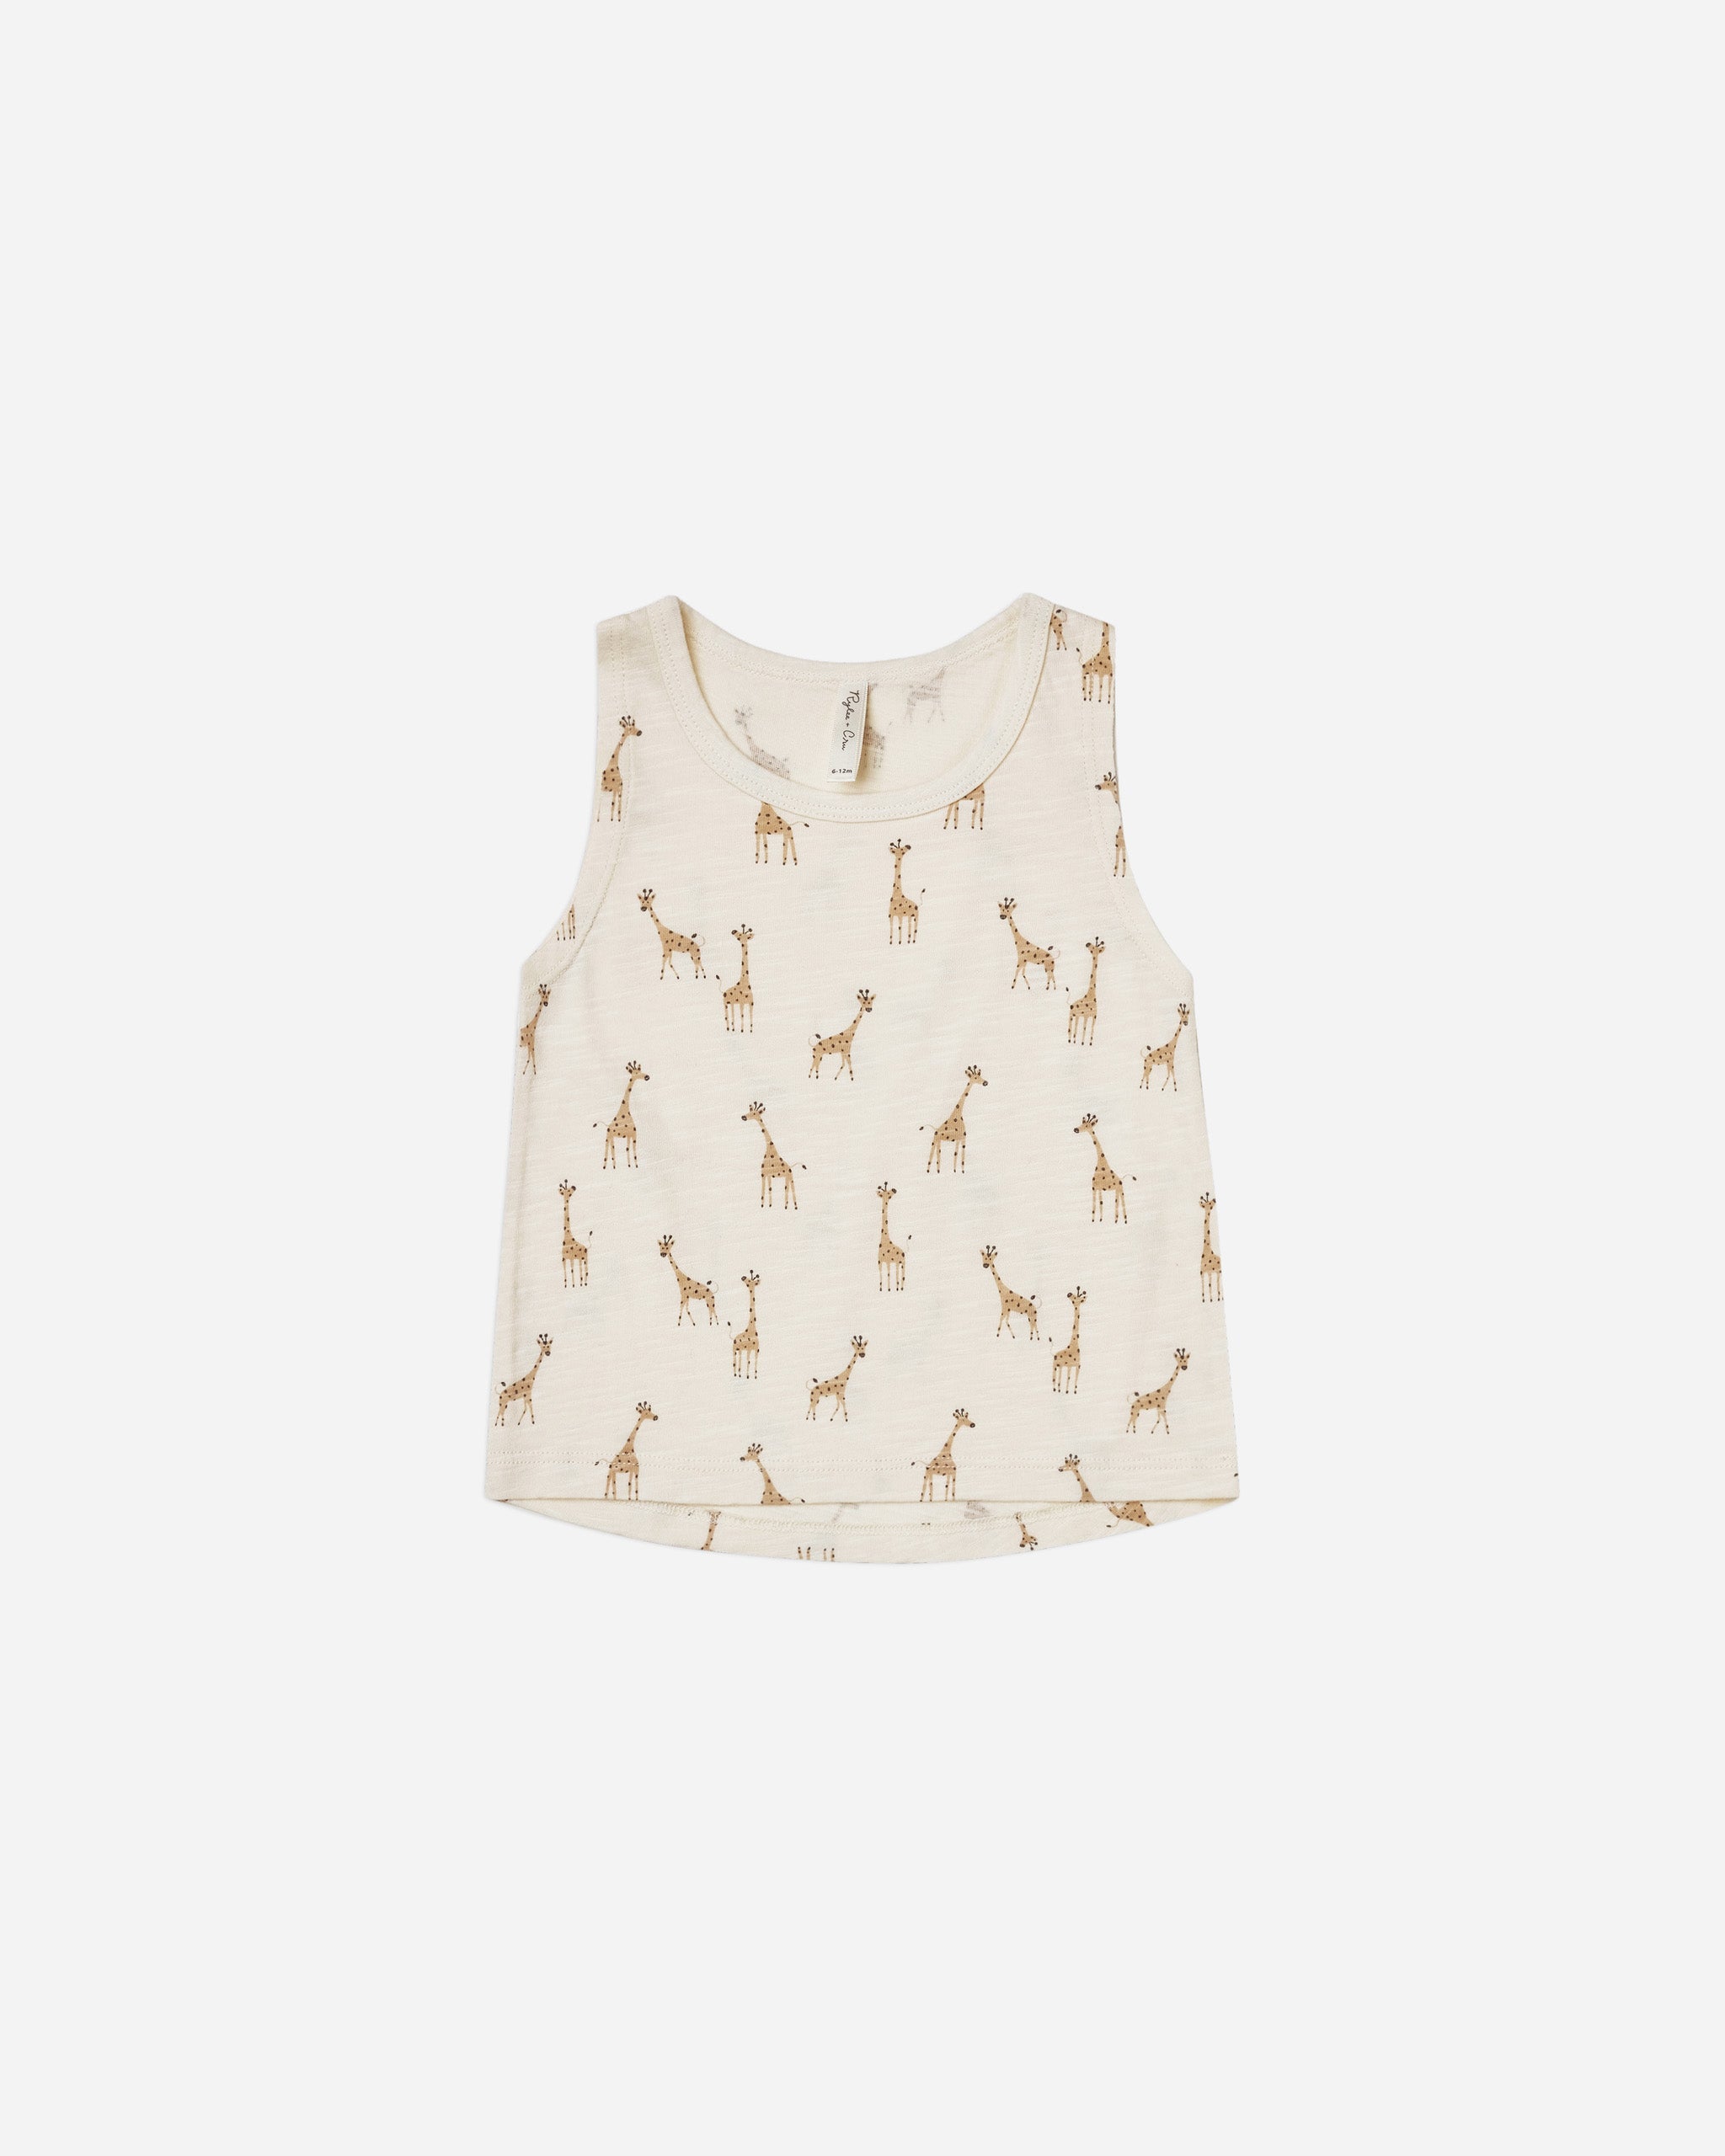 tank top || giraffes - Rylee + Cru | Kids Clothes | Trendy Baby Clothes | Modern Infant Outfits |